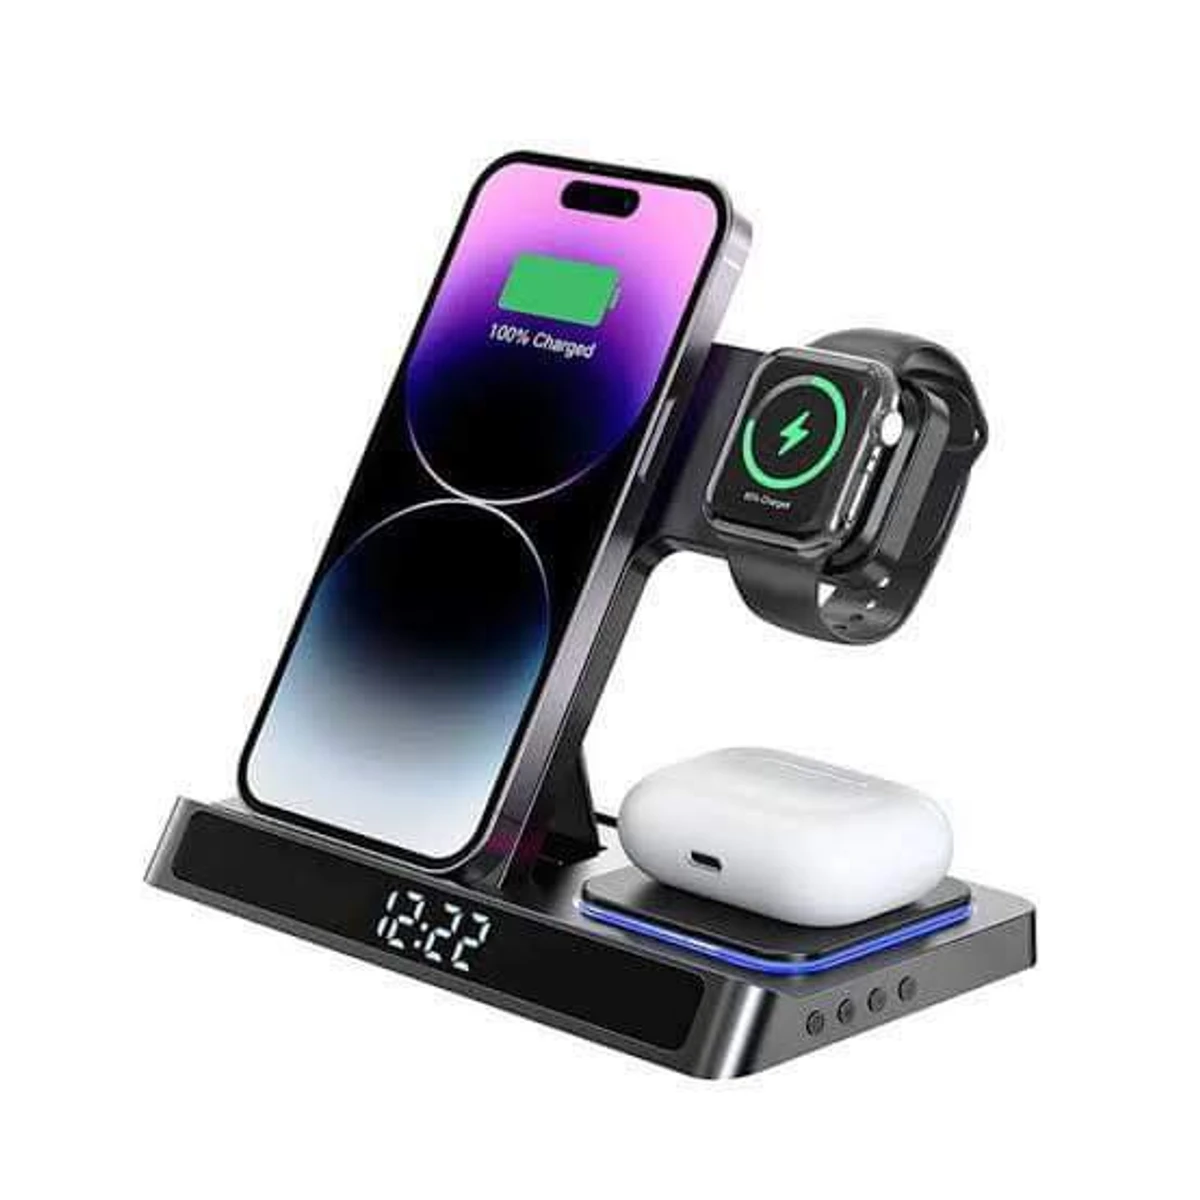 WiWU Wi-W006 5 in1 wireless charger with clock&Alarm ambient light for daily use